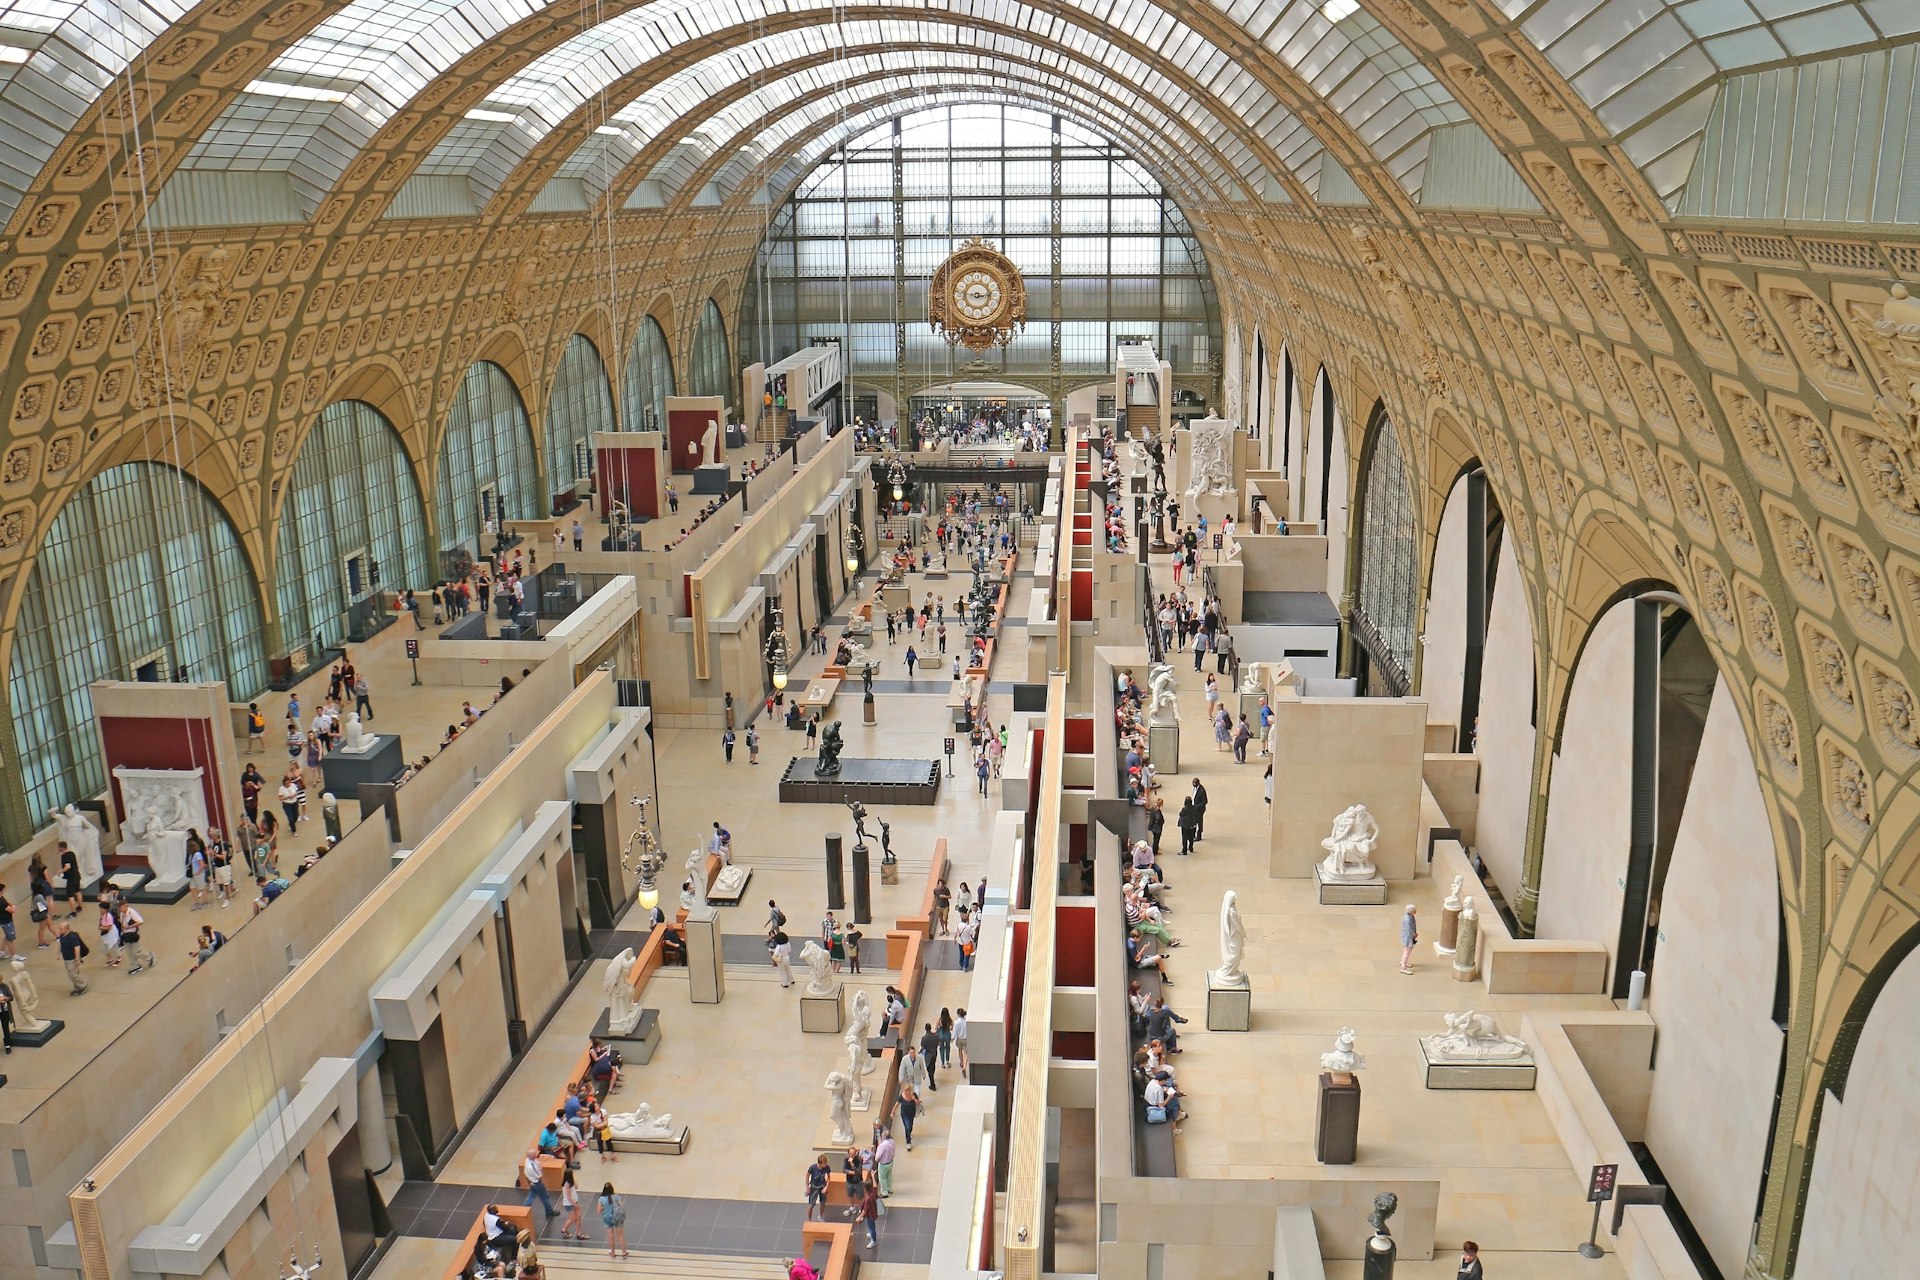 A view of the inside of the Musée d'Orsay, a huge room with a dome glass ceiling.